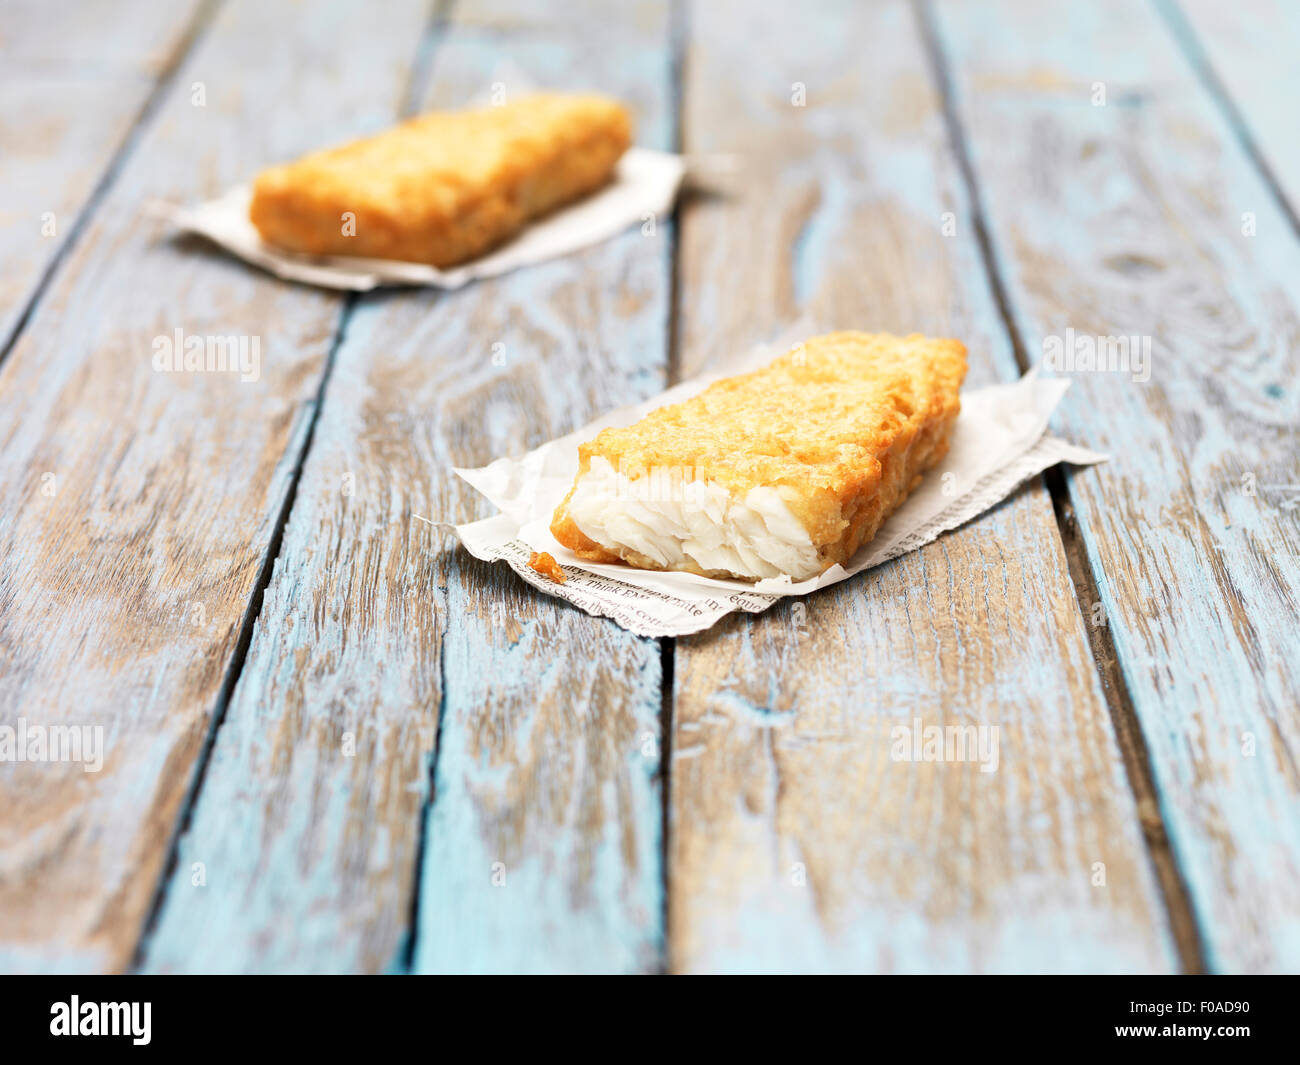 Two fried chunky battered haddock pieces on wooden table Stock Photo